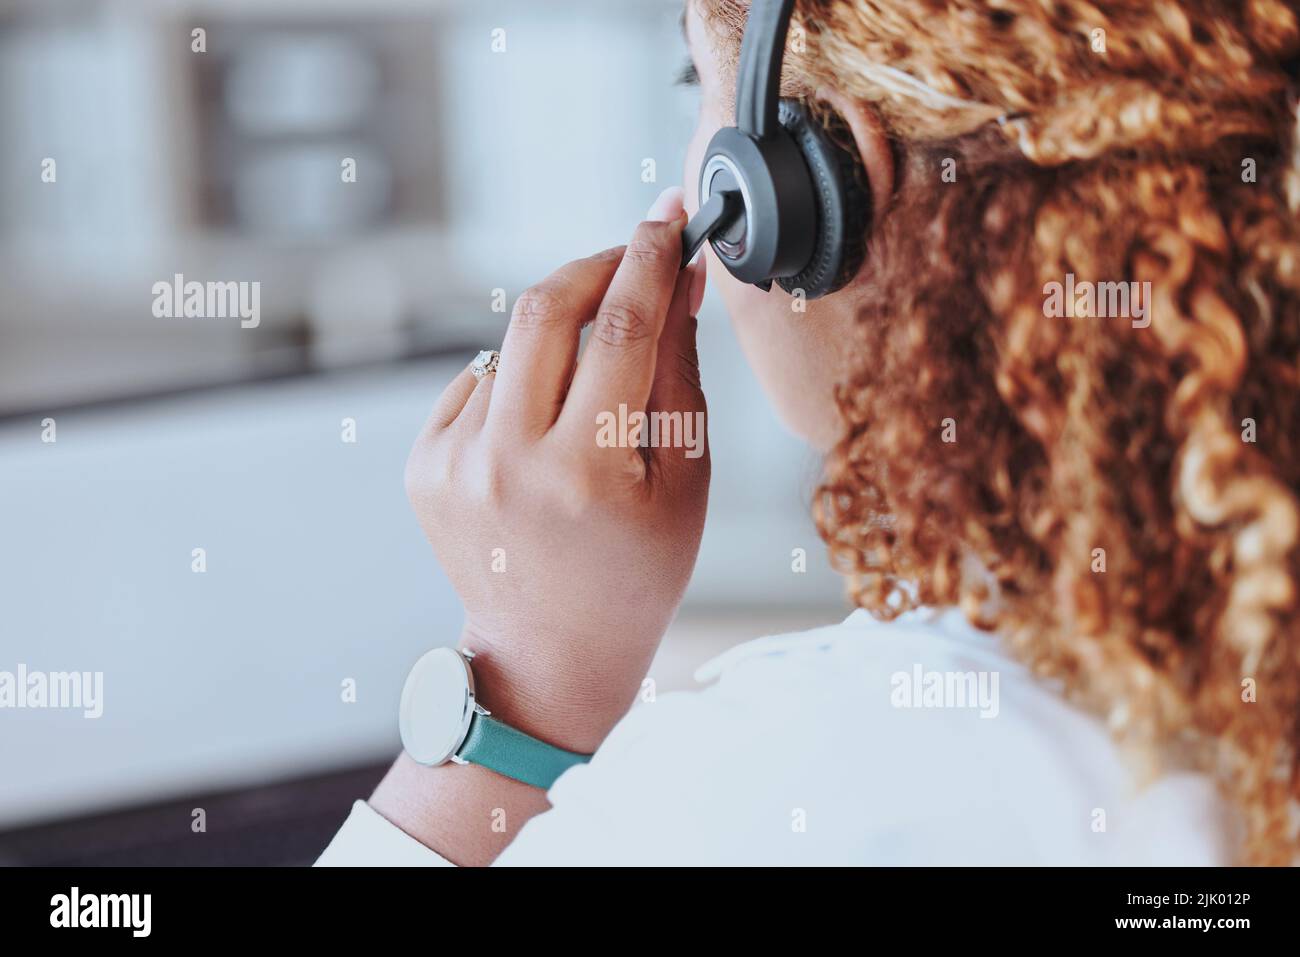 Talking, advice, discussion being had by a call center agent wearing a headset in an office at work. Customer service, support and conversation given Stock Photo